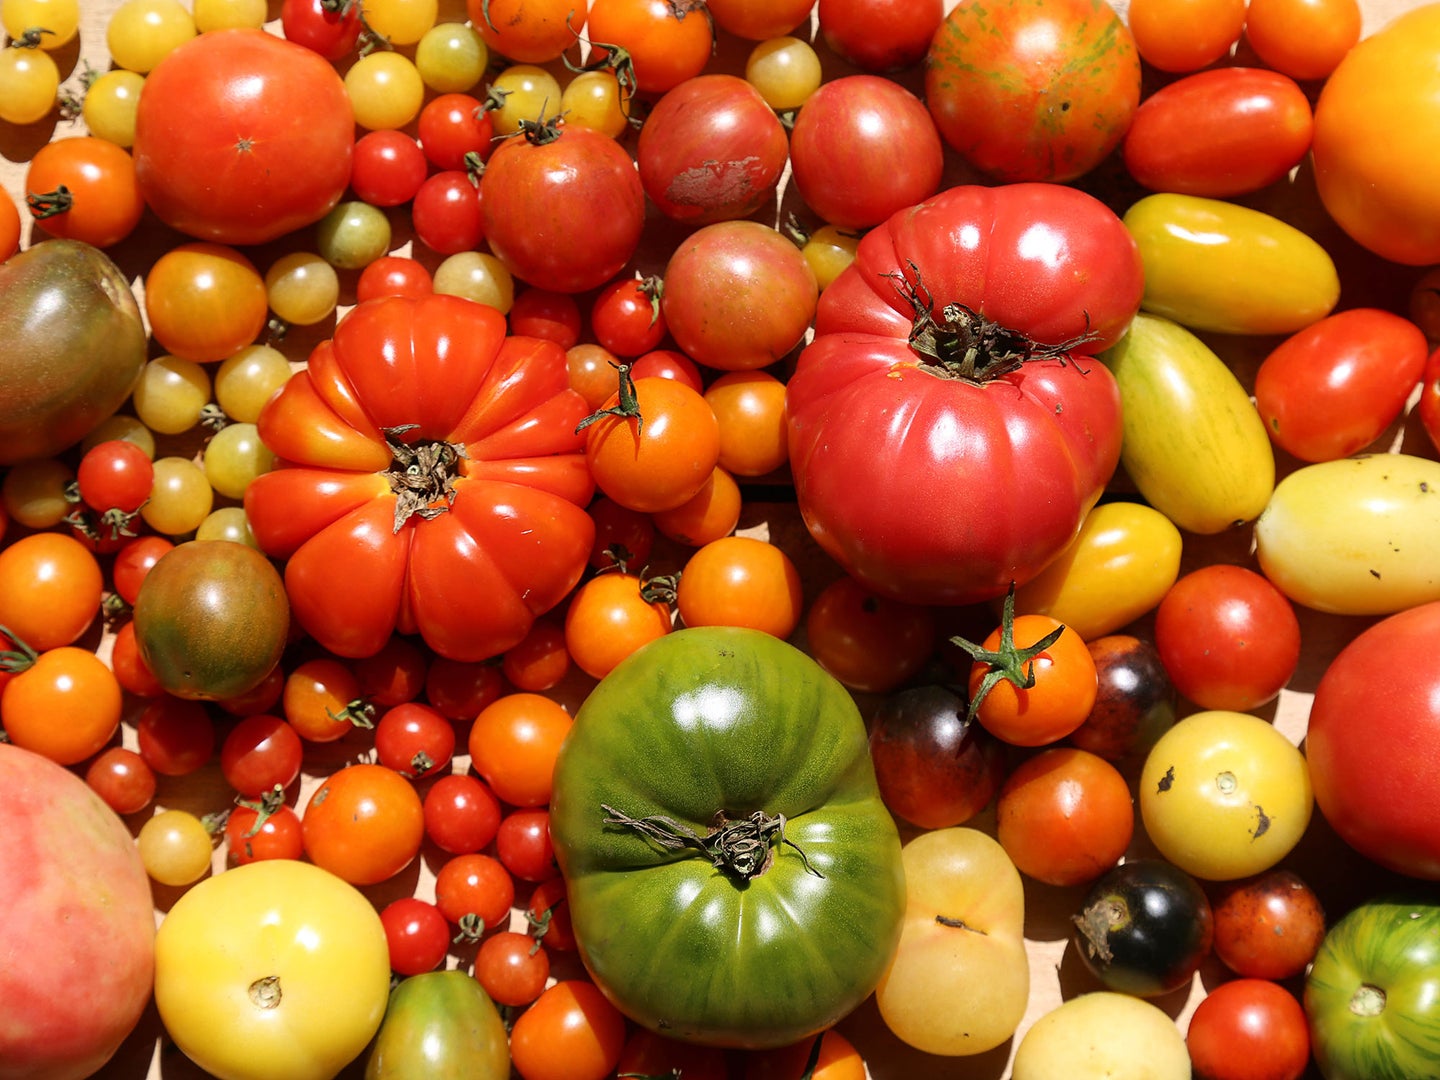 Basketful of Tomatoes for Tomato Recipes